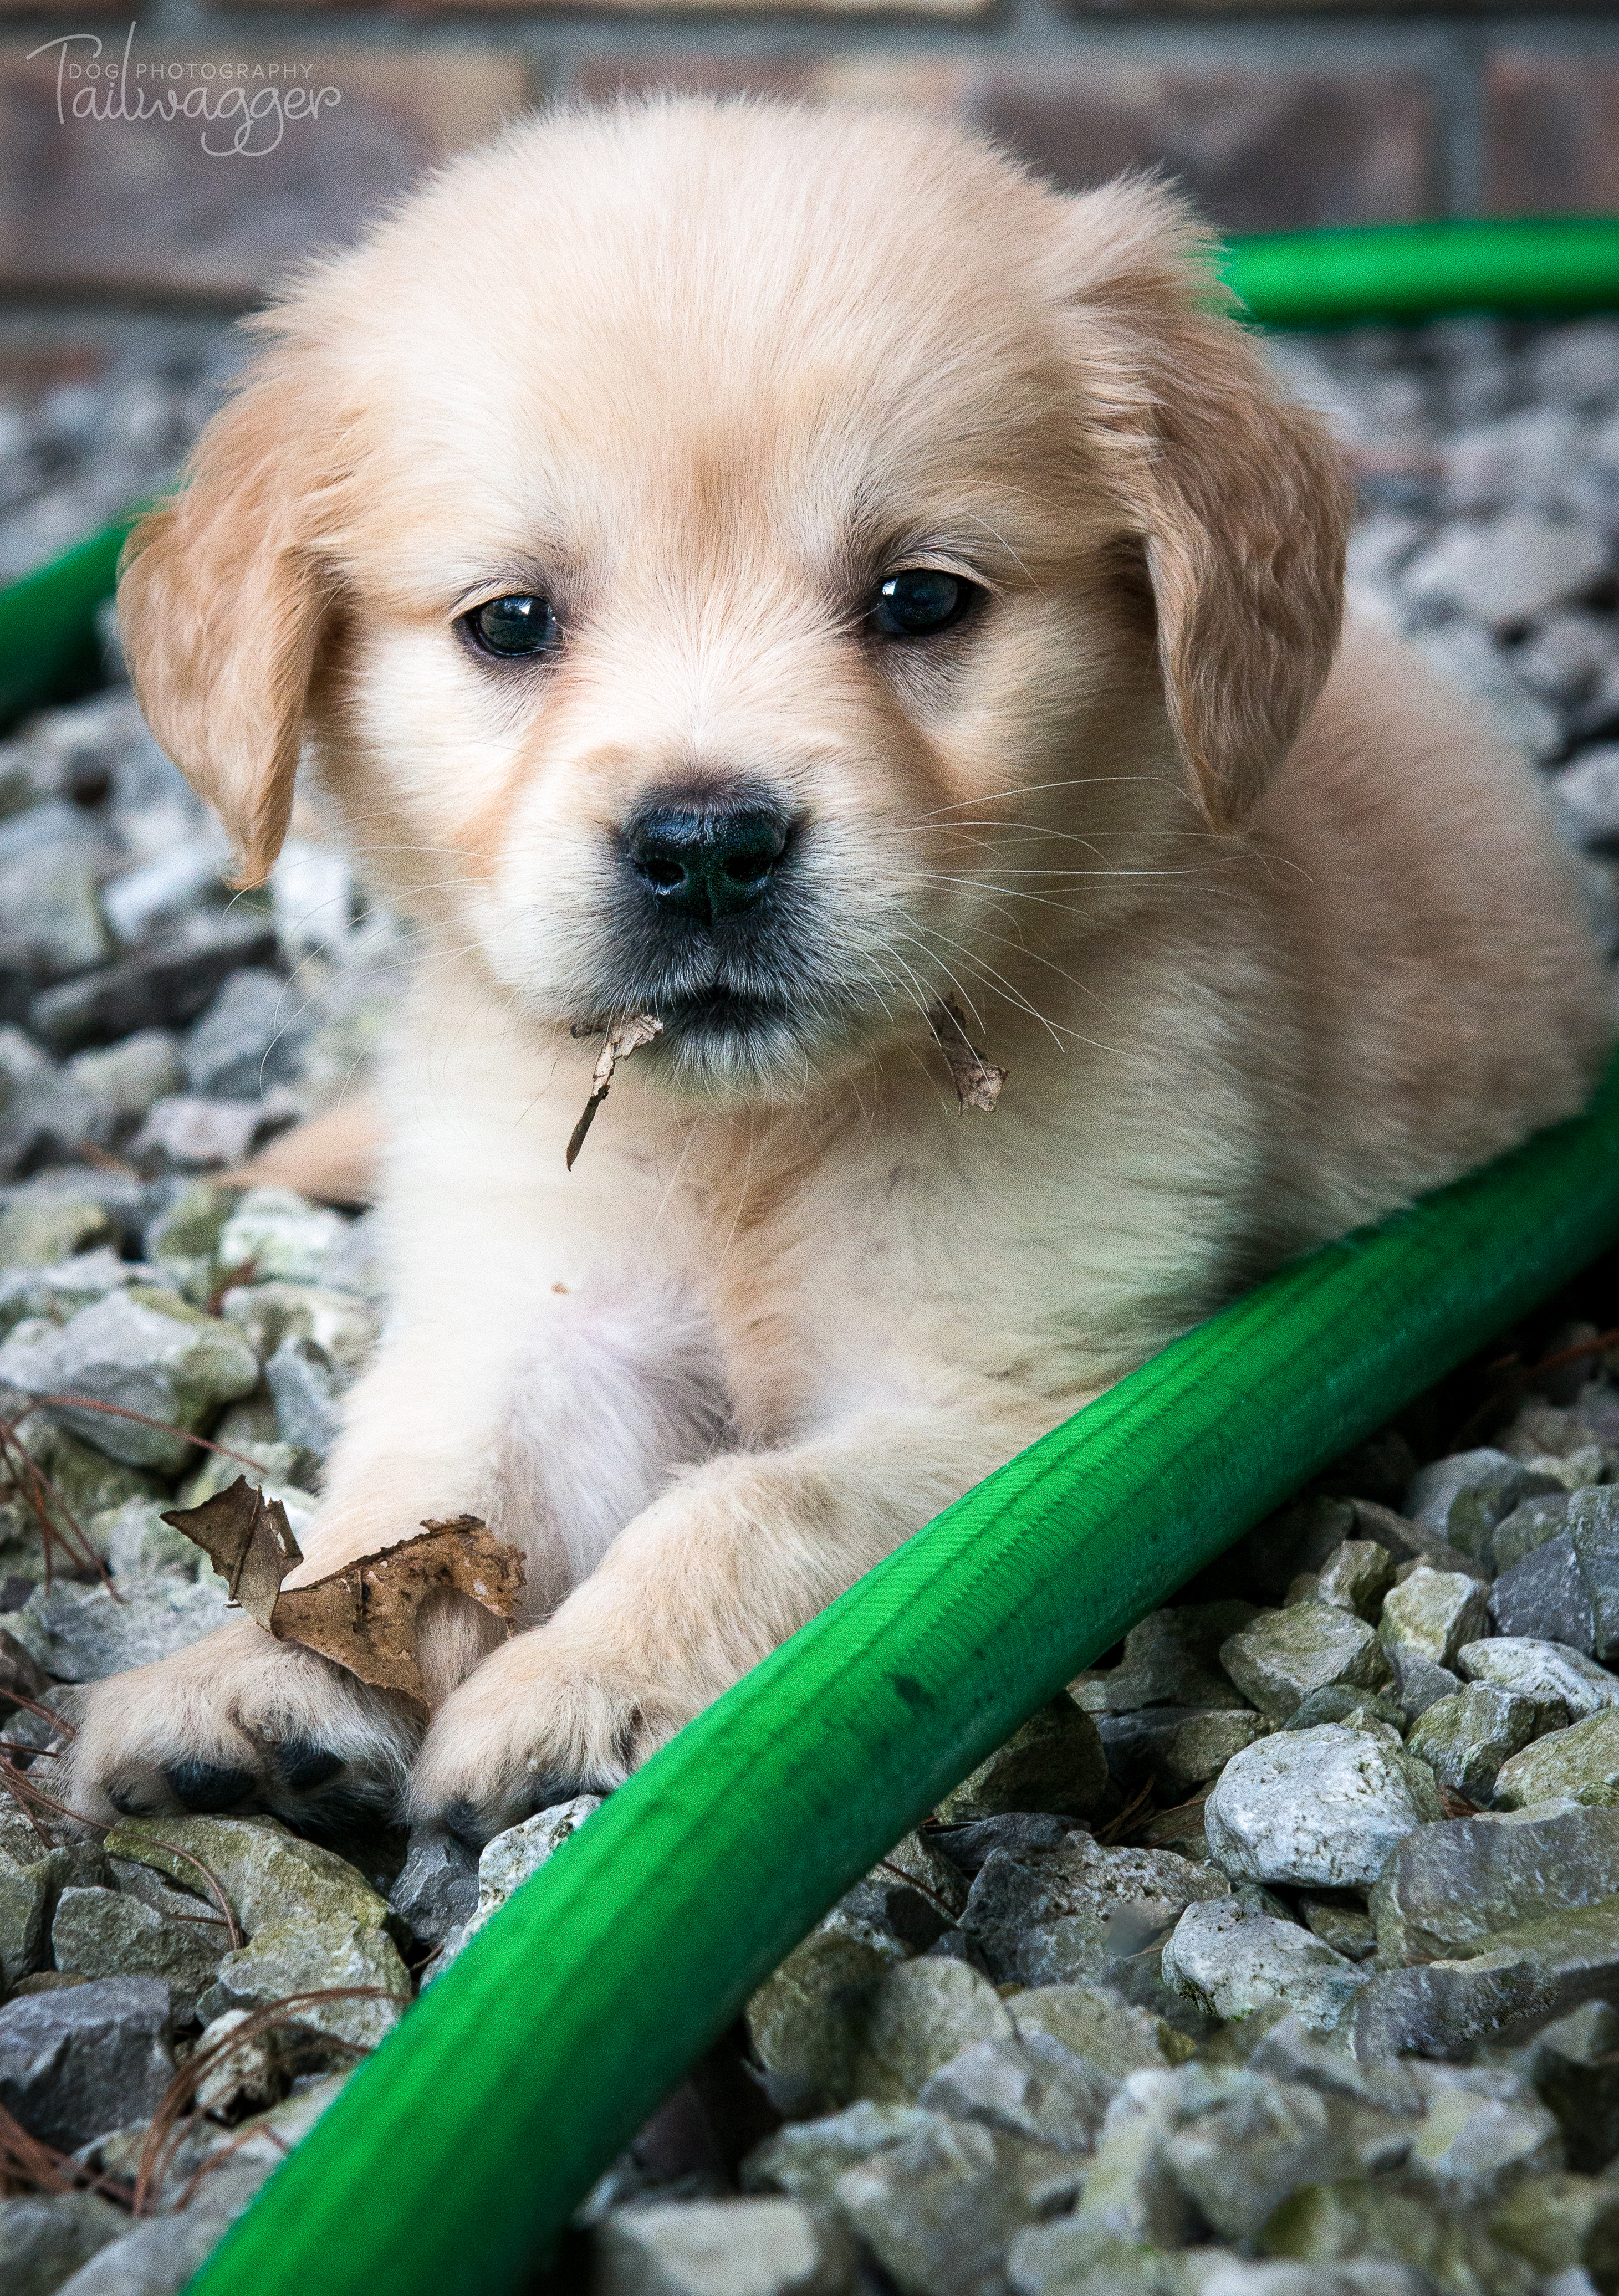 Photograph of a 7 1/2 week old Golden Retriever puppy sitting on stones.